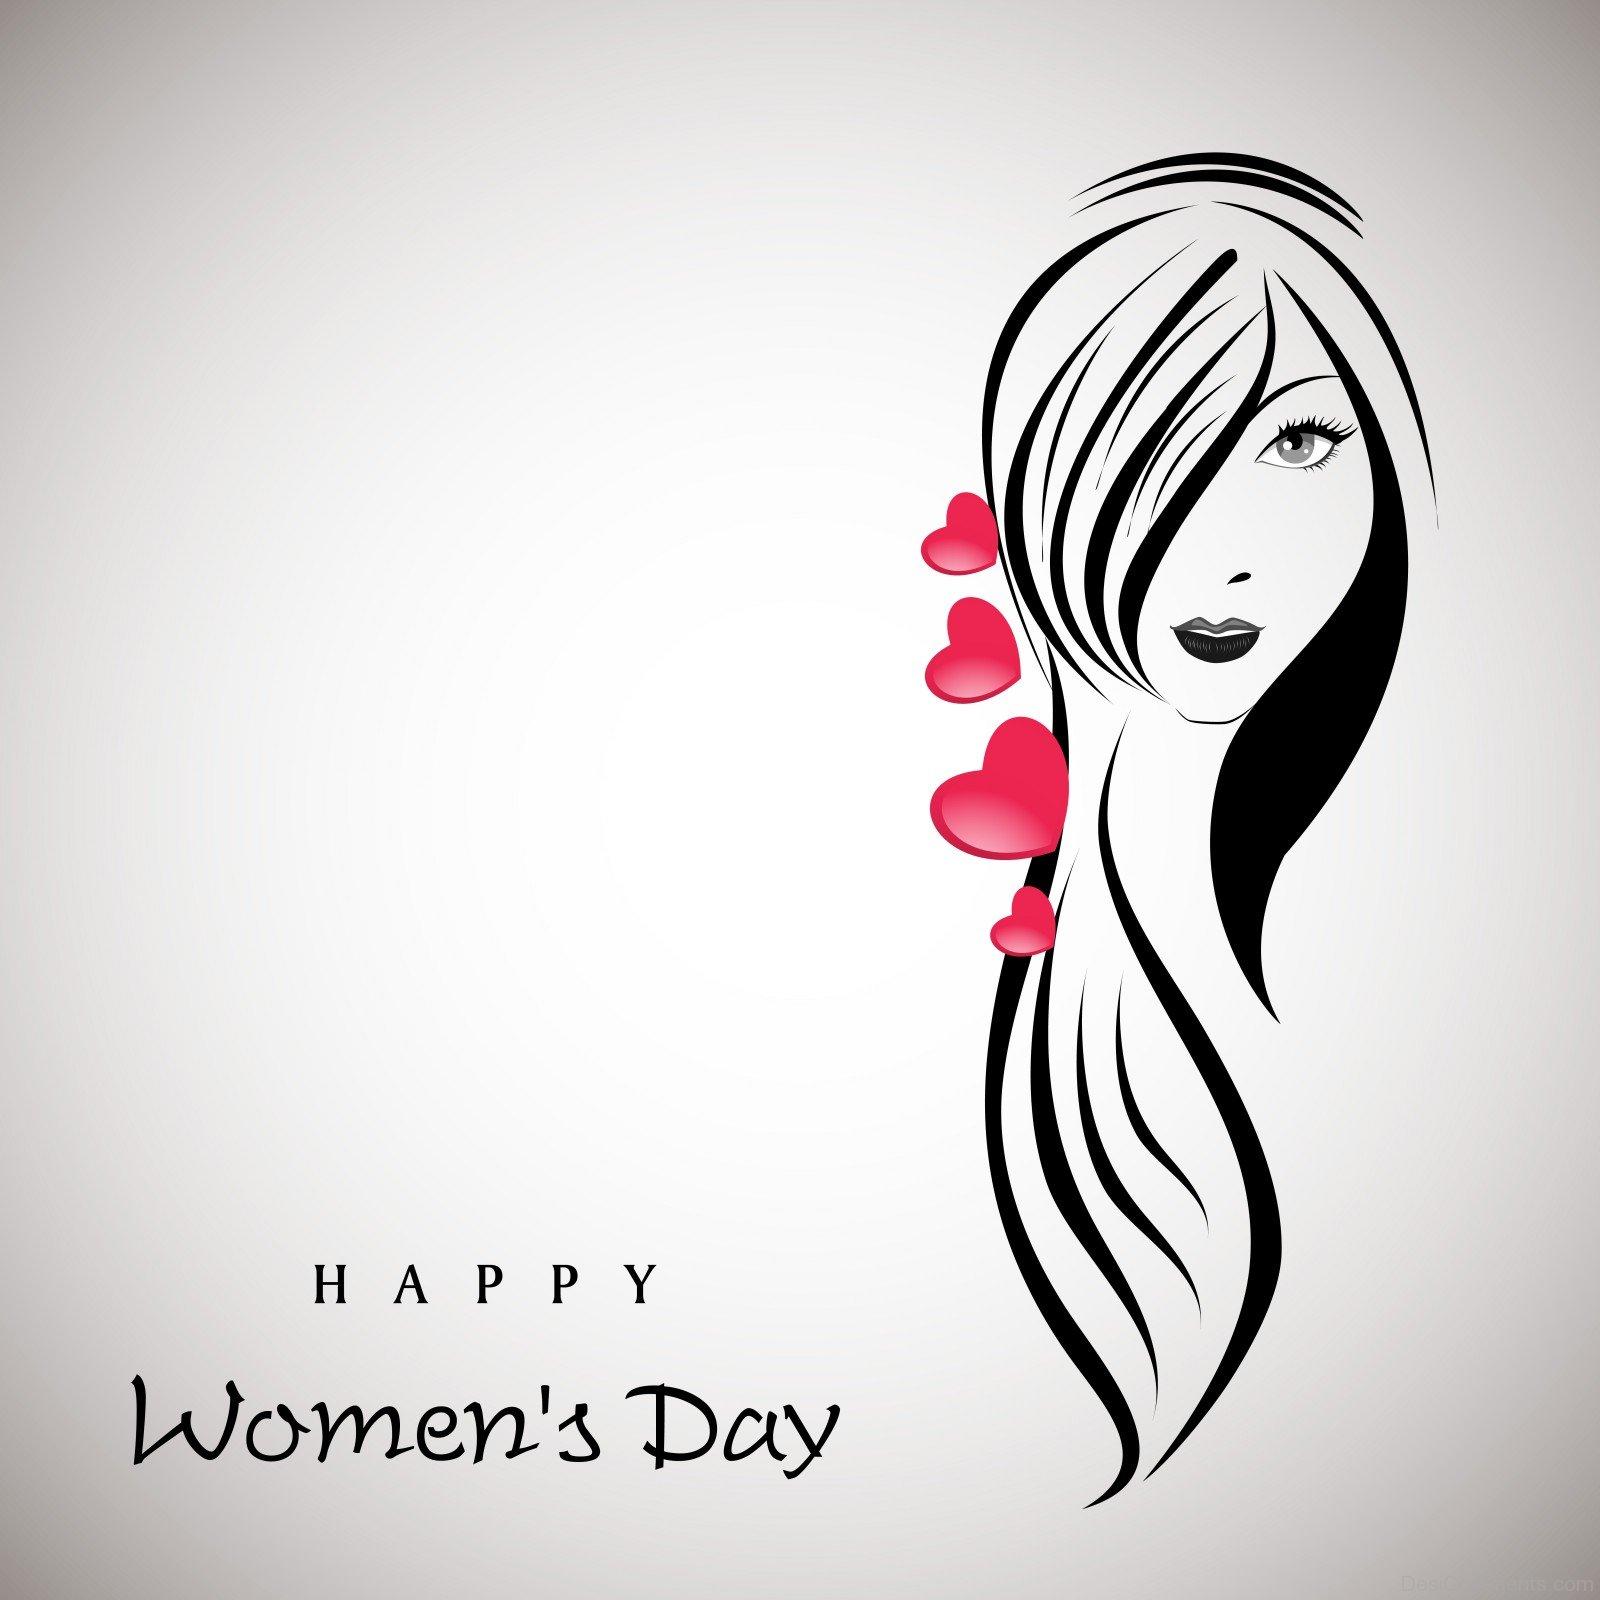 Womens Day Picture Womens Day Image's Day Wishes